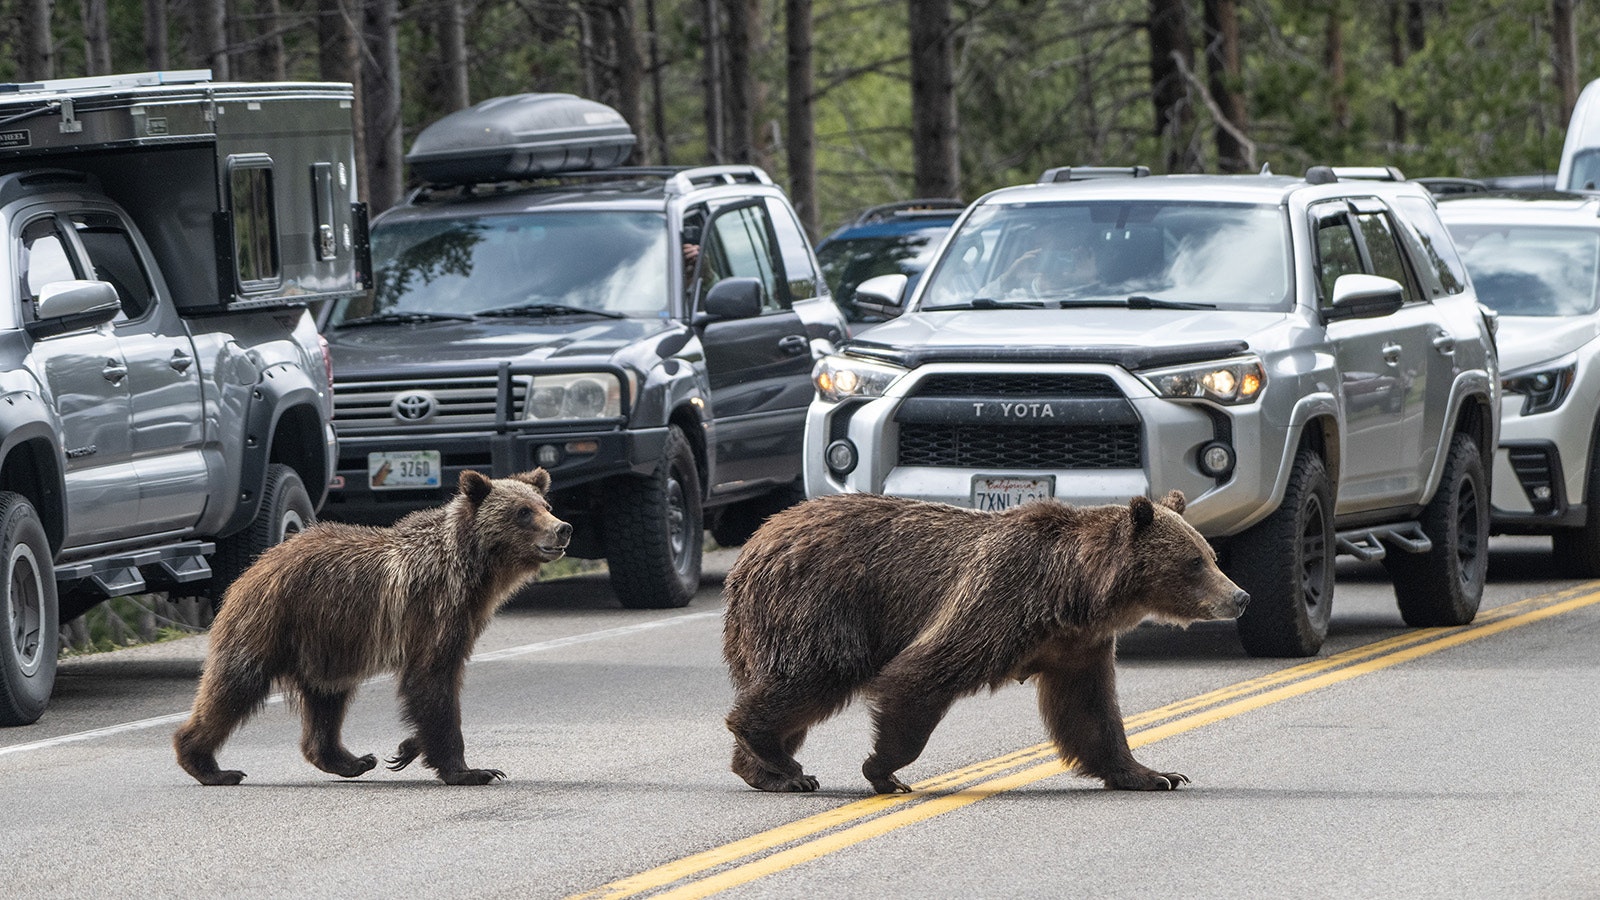 Grizzly 399 and her cub Spirit have caused some “bear jams” on the roads in Grand Teton National Park.